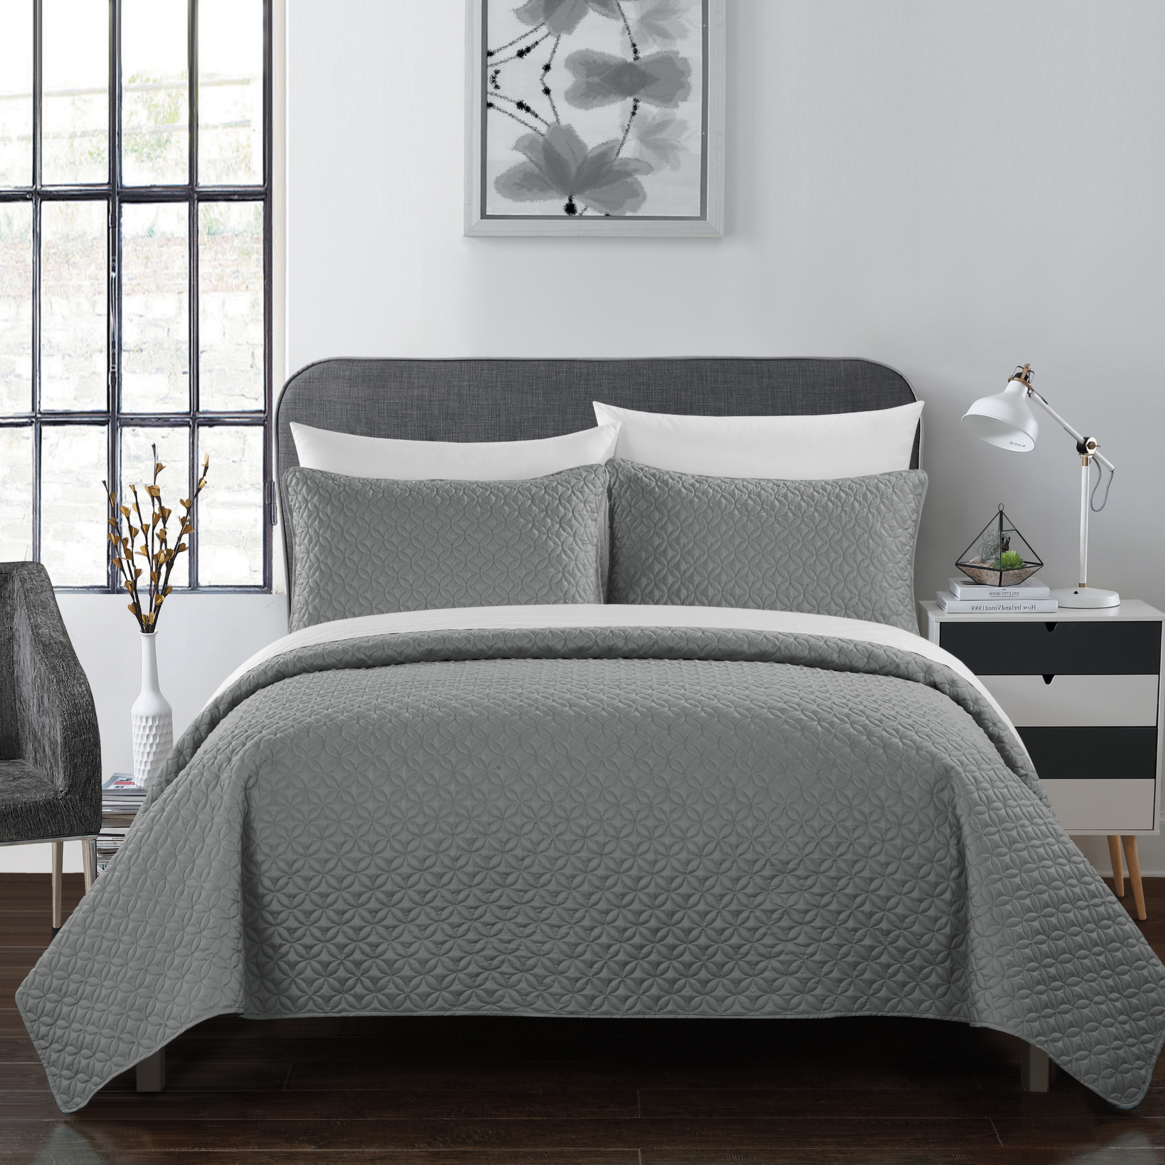 Gideon 7 Or 5 Piece Quilt Cover Set Rose Star Geometric Quilted Bed In A Bag - Sheet Set Decorative Pillow Shams Included - Grey, King